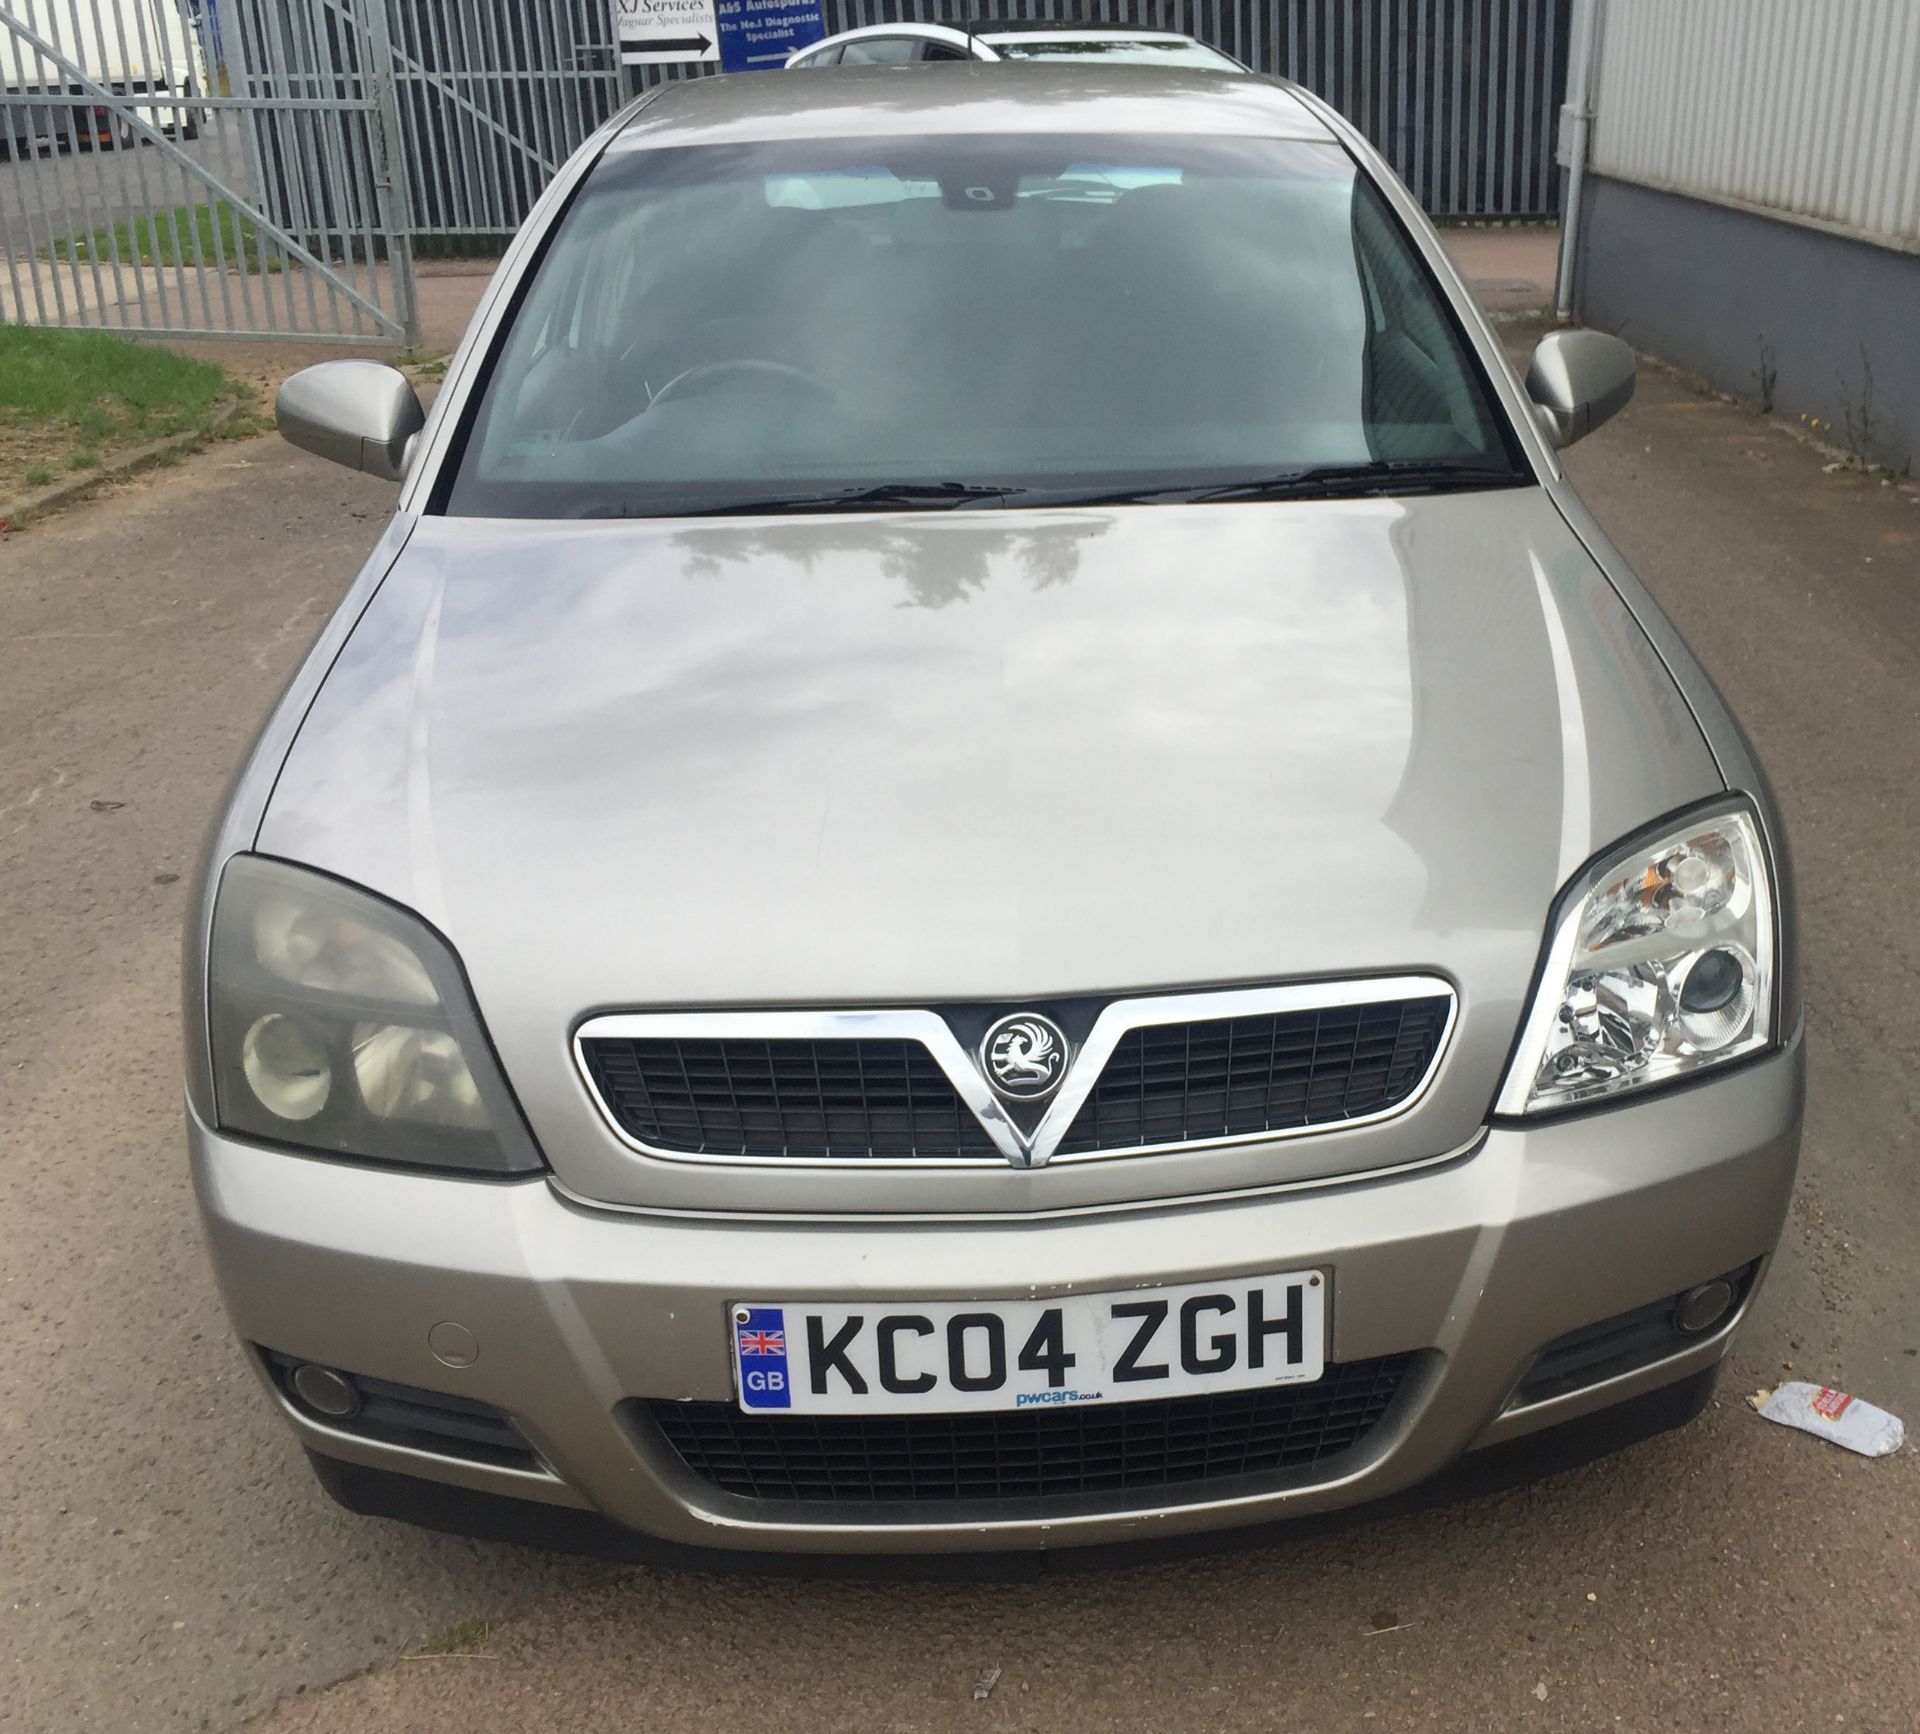 2004 Vauxhall Vectra 2.2 Sri Automatic 4 Dr Saloon - CL505 - NO VAT ON THE HAMMER - Location: - Image 6 of 7